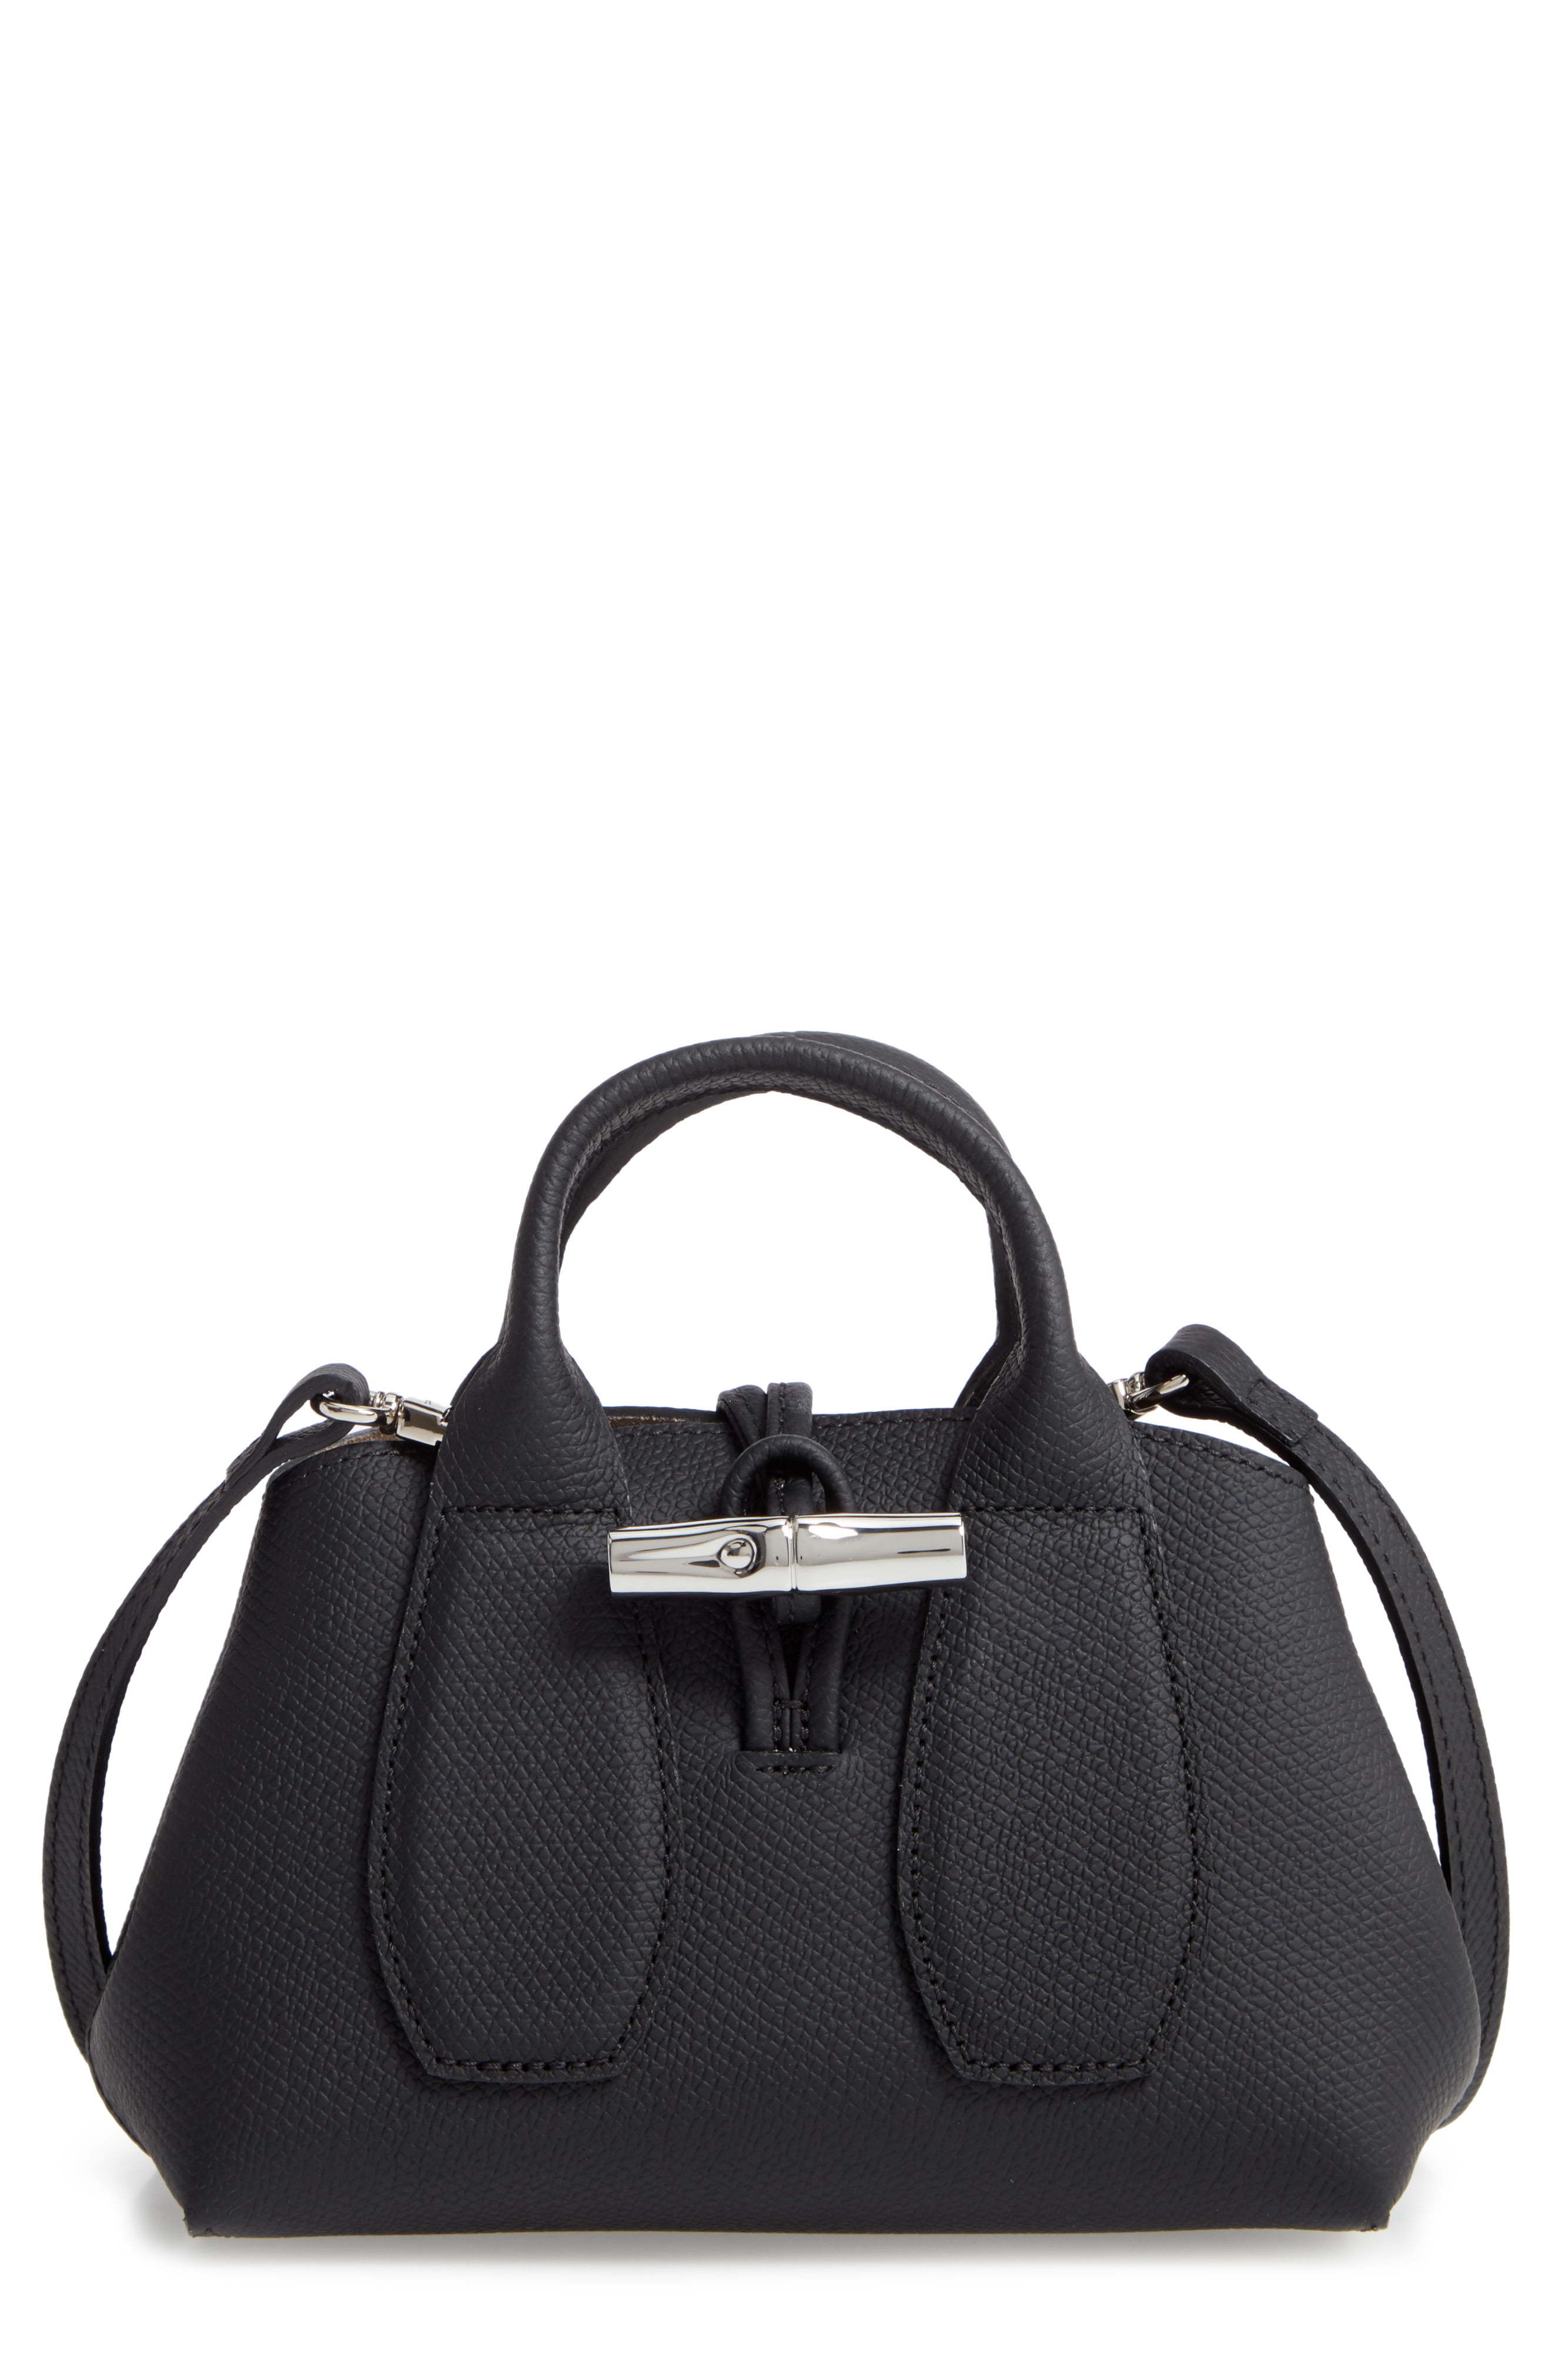 Longchamp Extra Small Roseau Leather Tote, $380 | Nordstrom | Lookastic